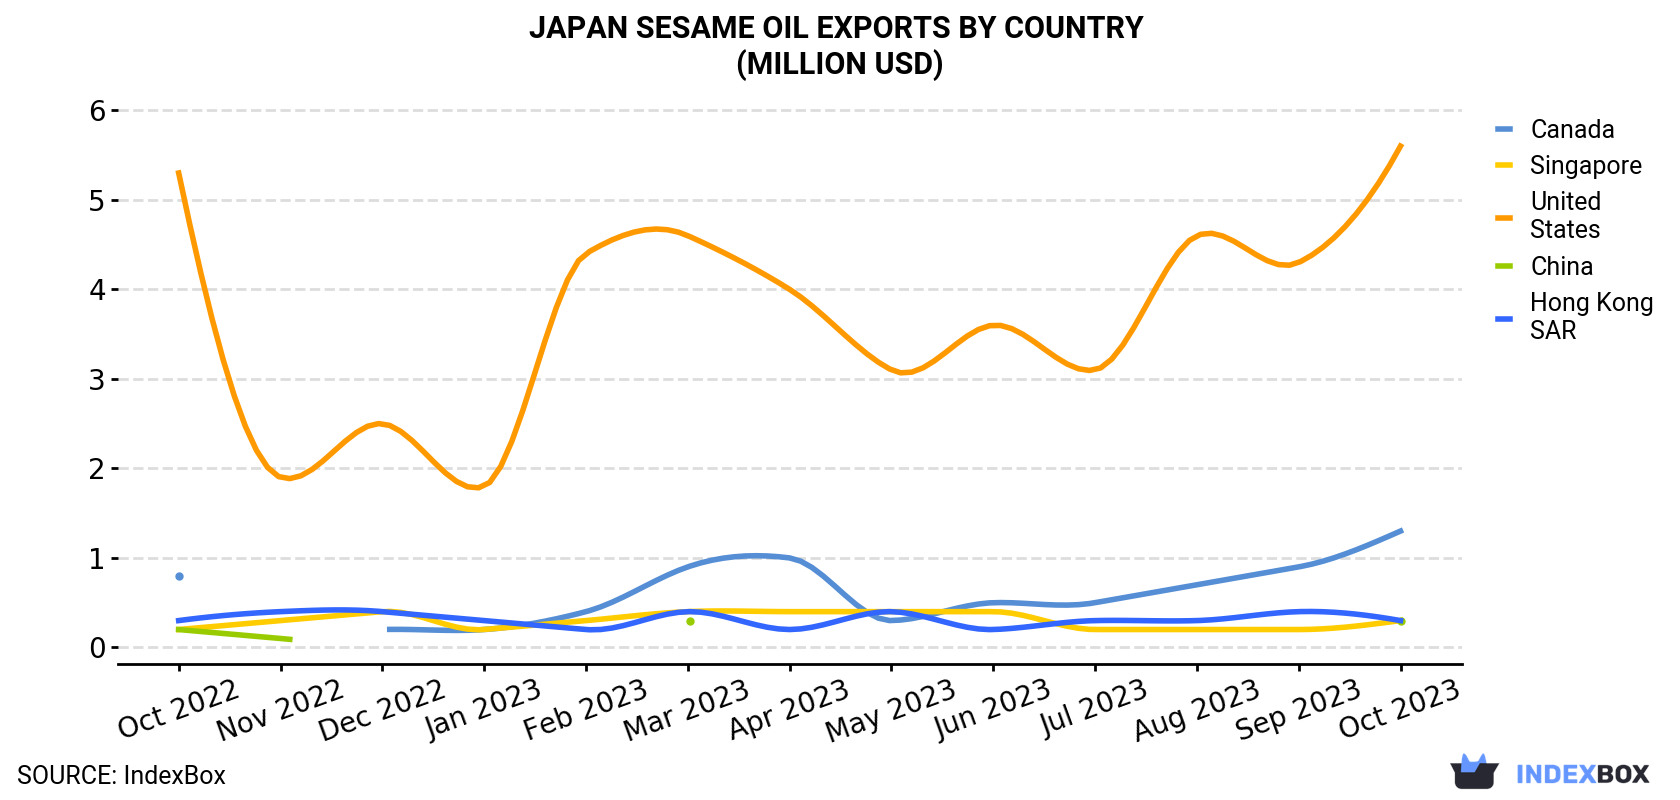 Japan Sesame Oil Exports By Country (Million USD)